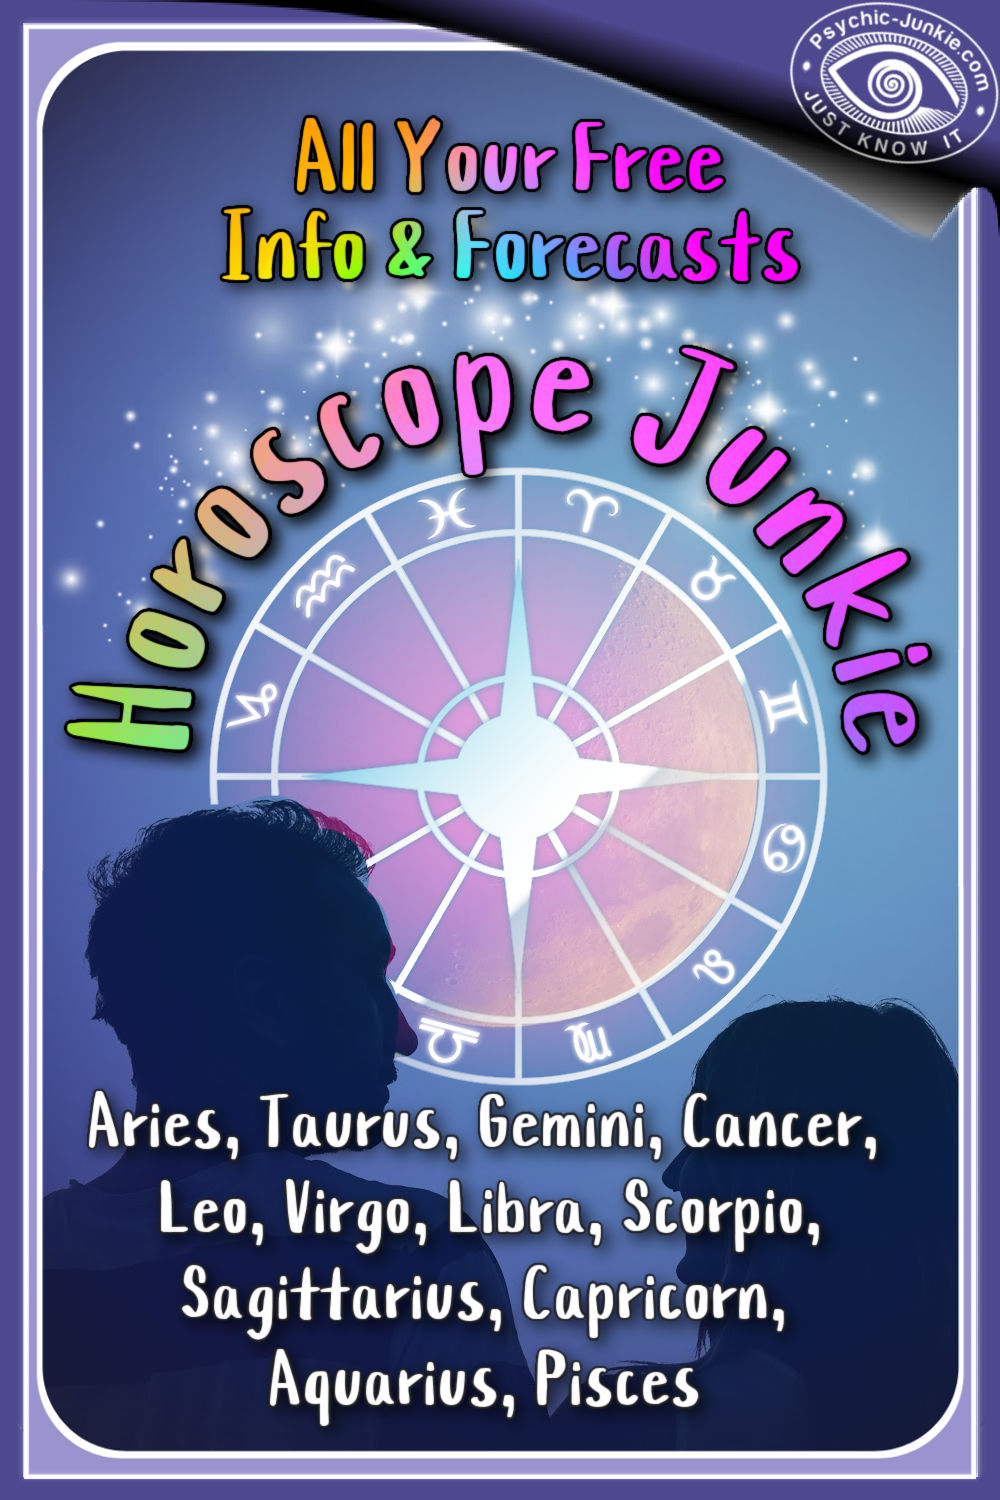 Traits, Characteristics, and Free Online Forecasts For All Horoscope Junkie Signs